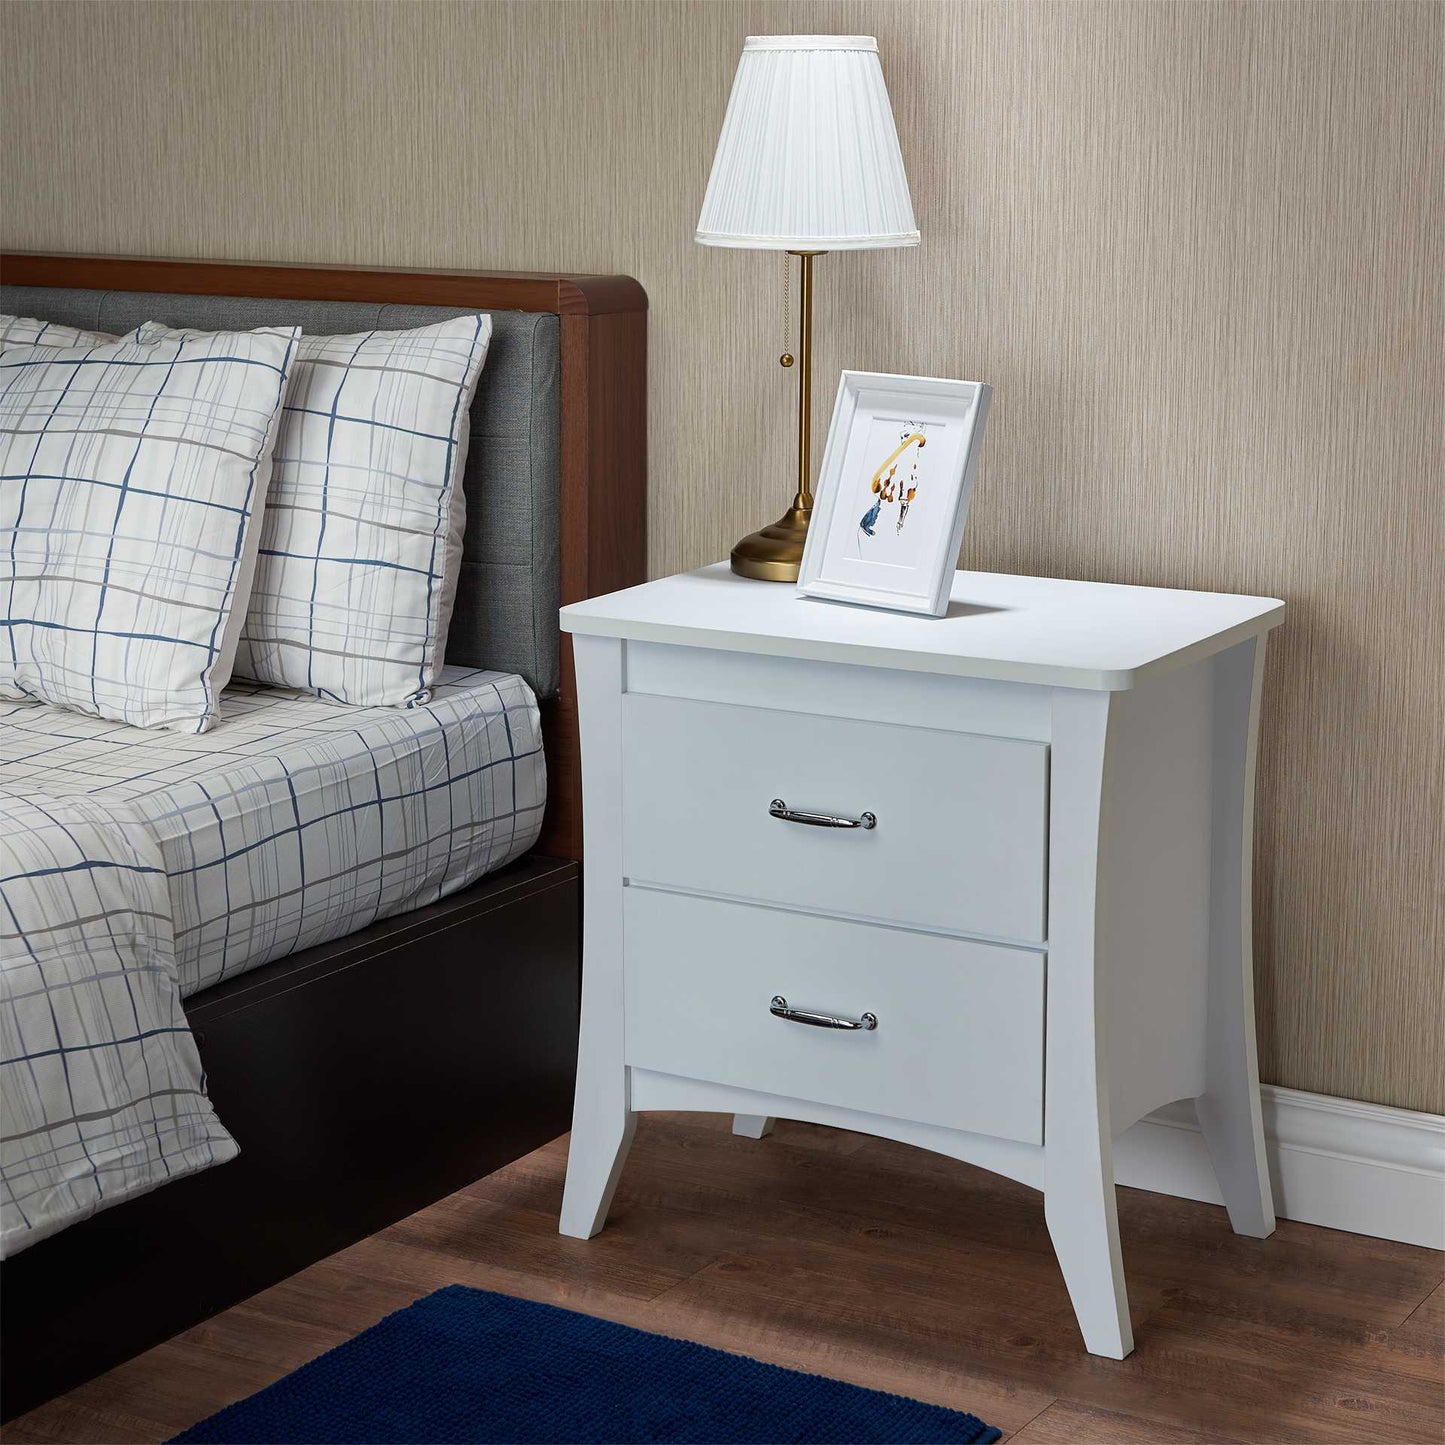 24" X 16" X 25" White Particle Board Nightstand